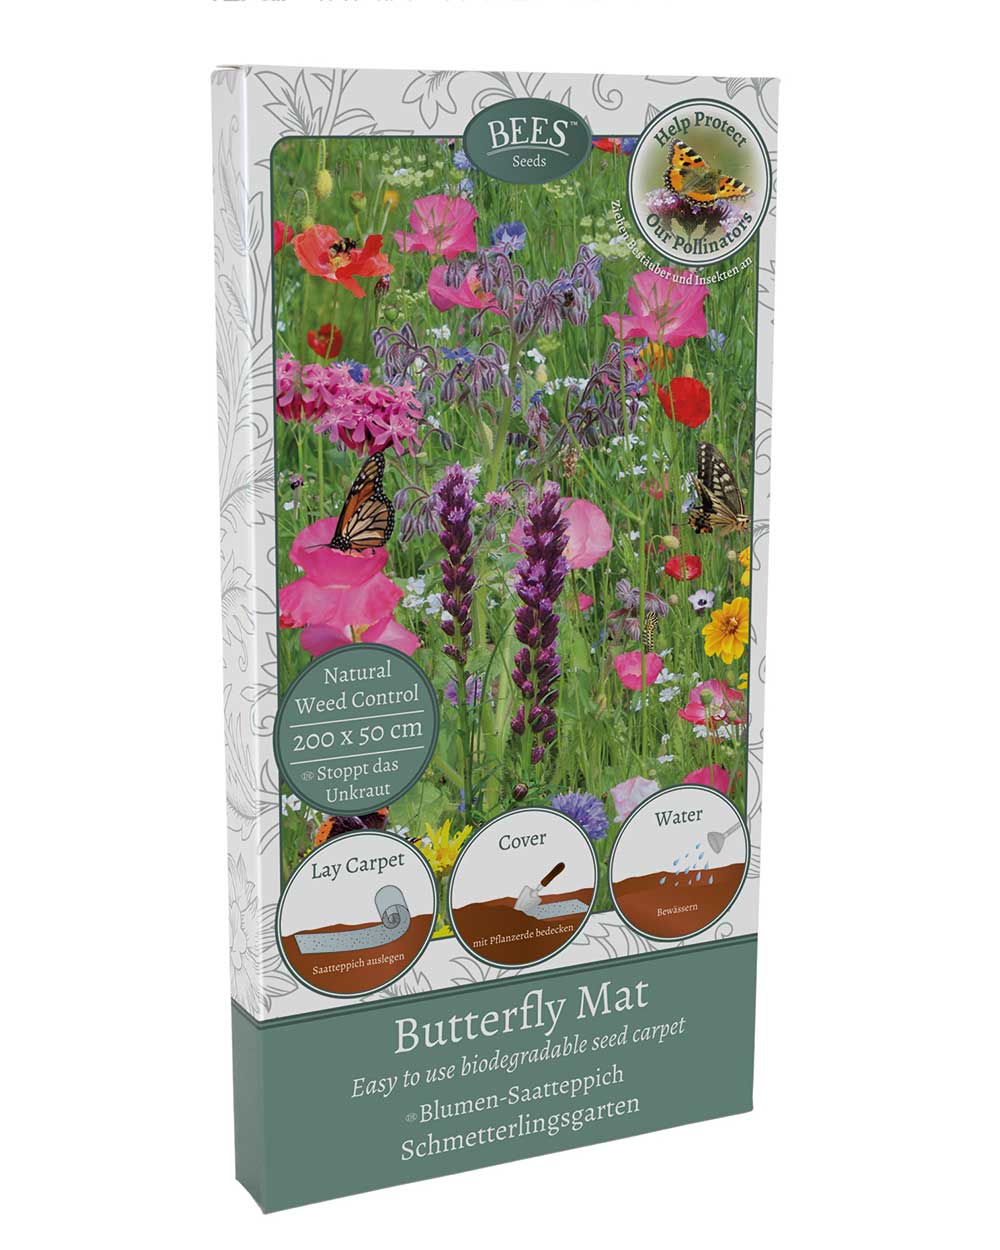 Bees Seeds Wildflower Butterfly Seed Mat Biodegradable